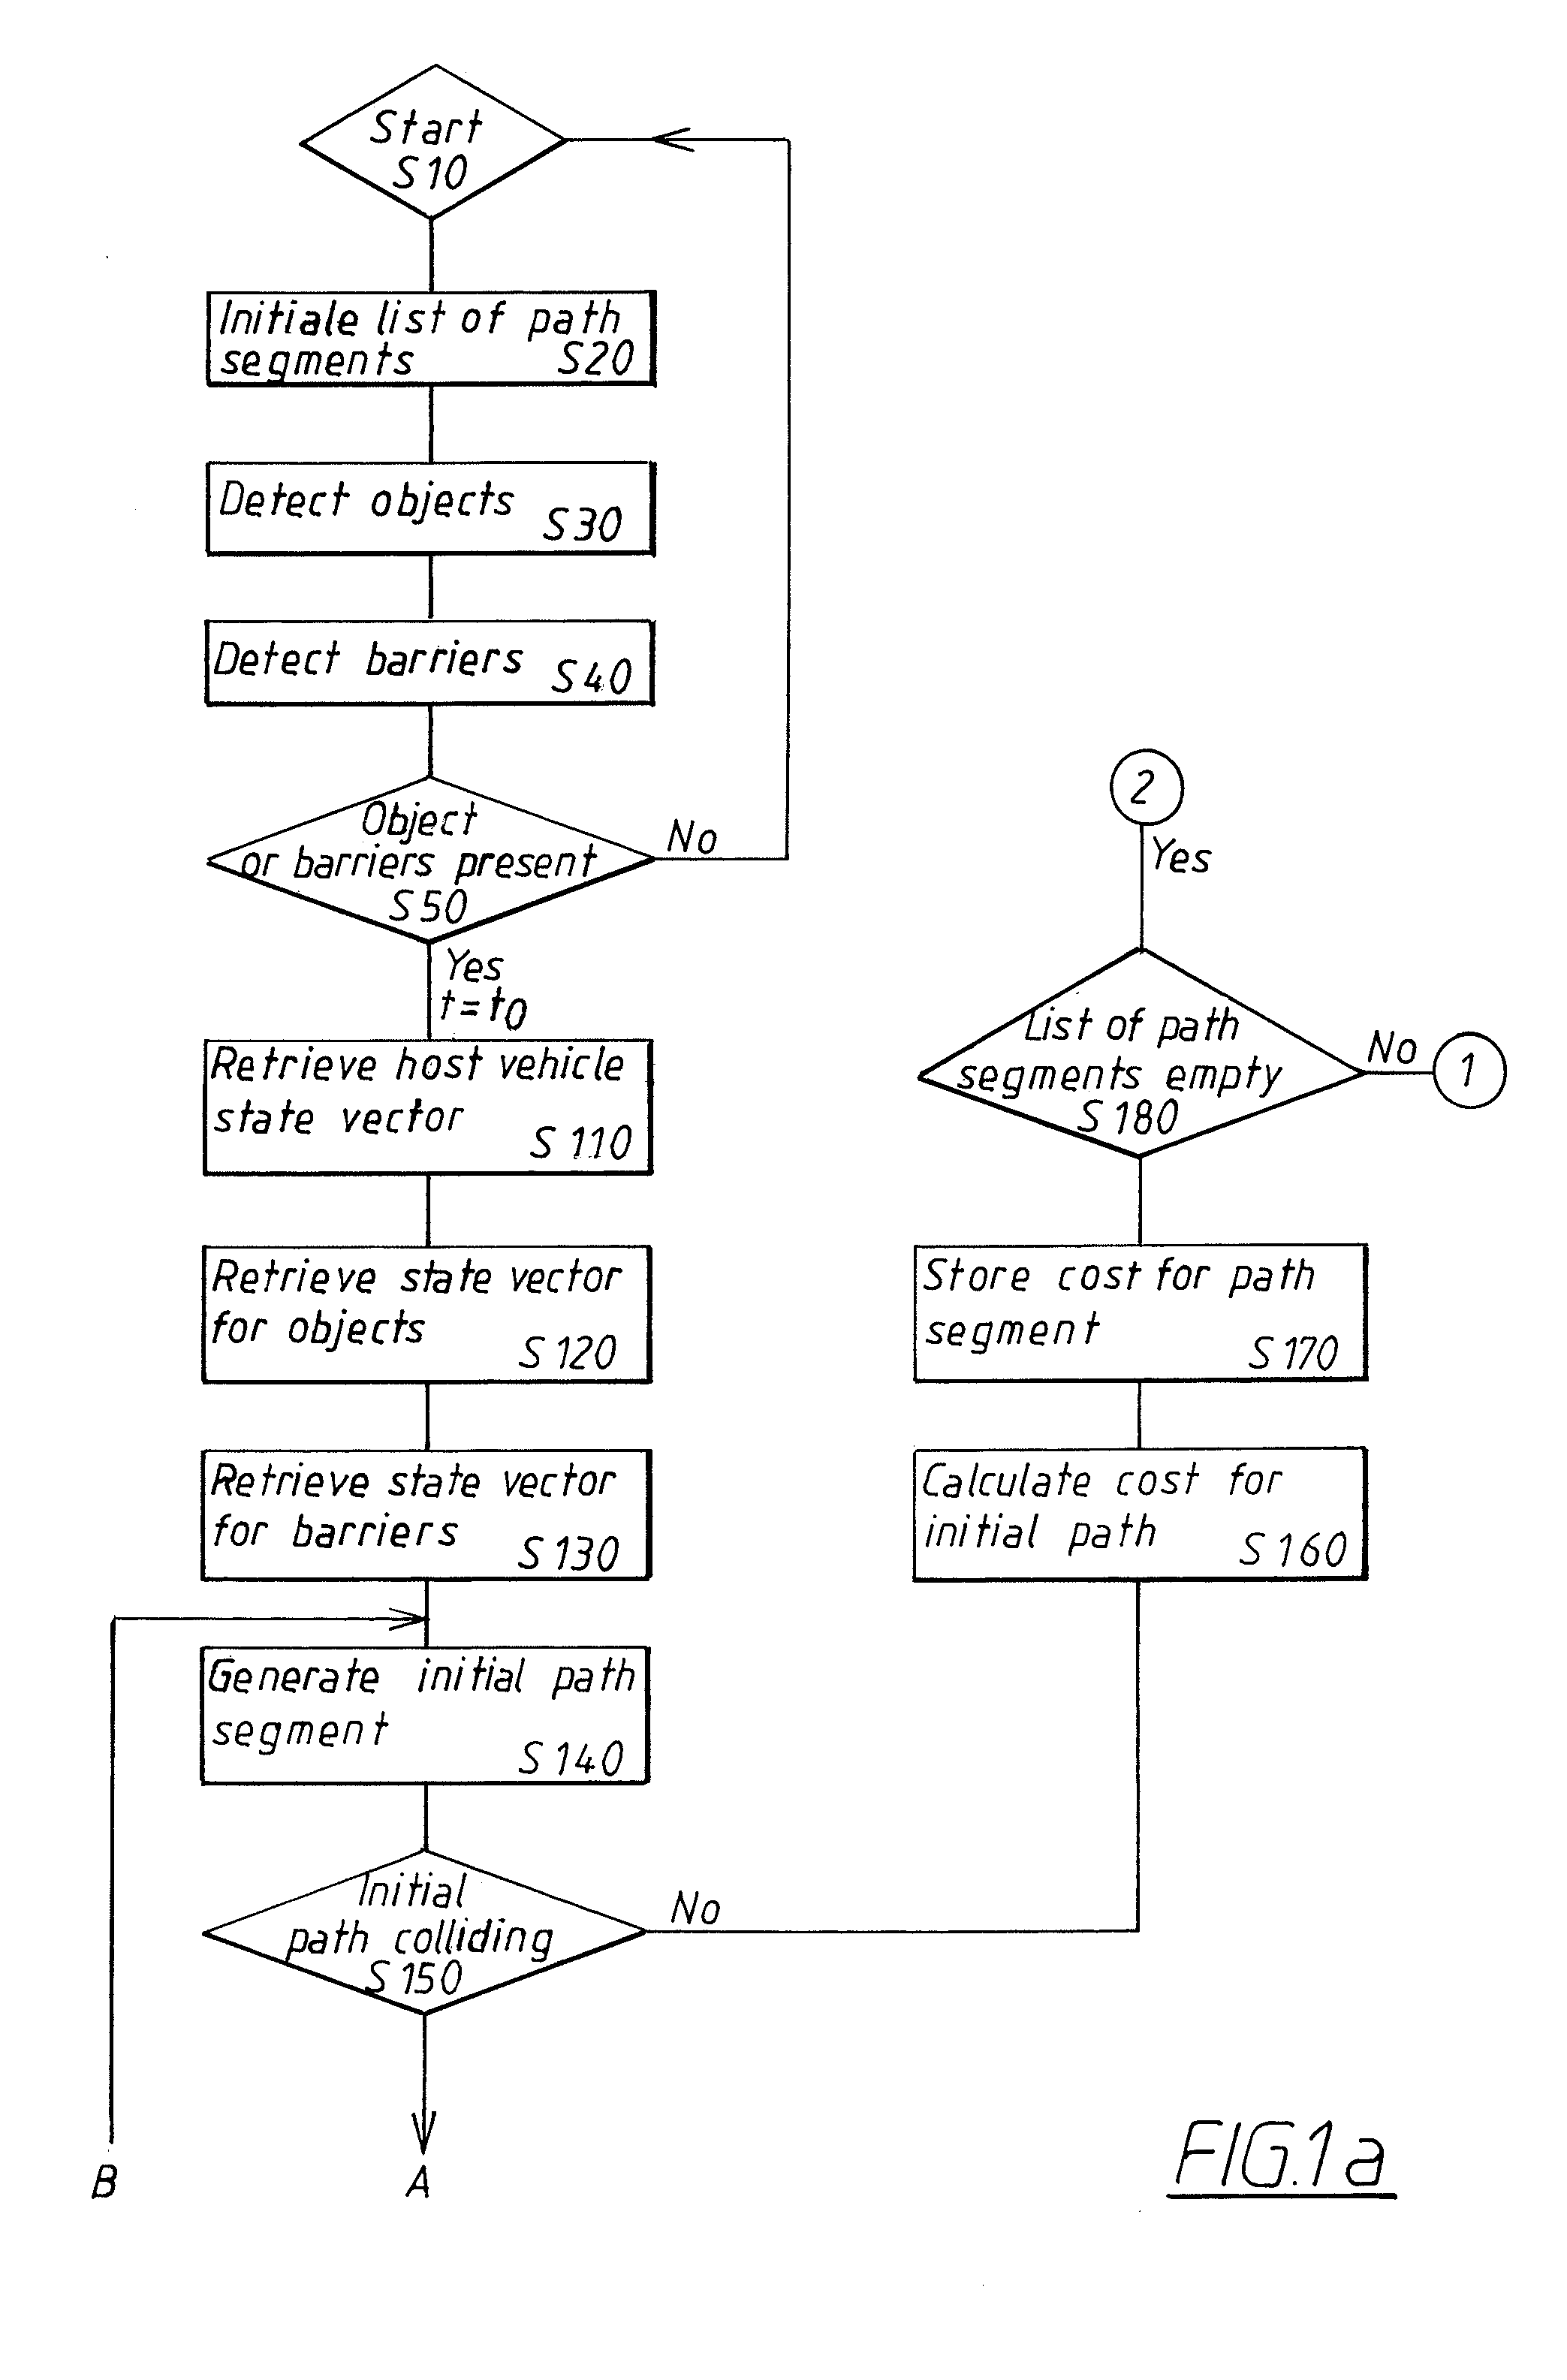 System and method for assessing vehicle paths in a road environment